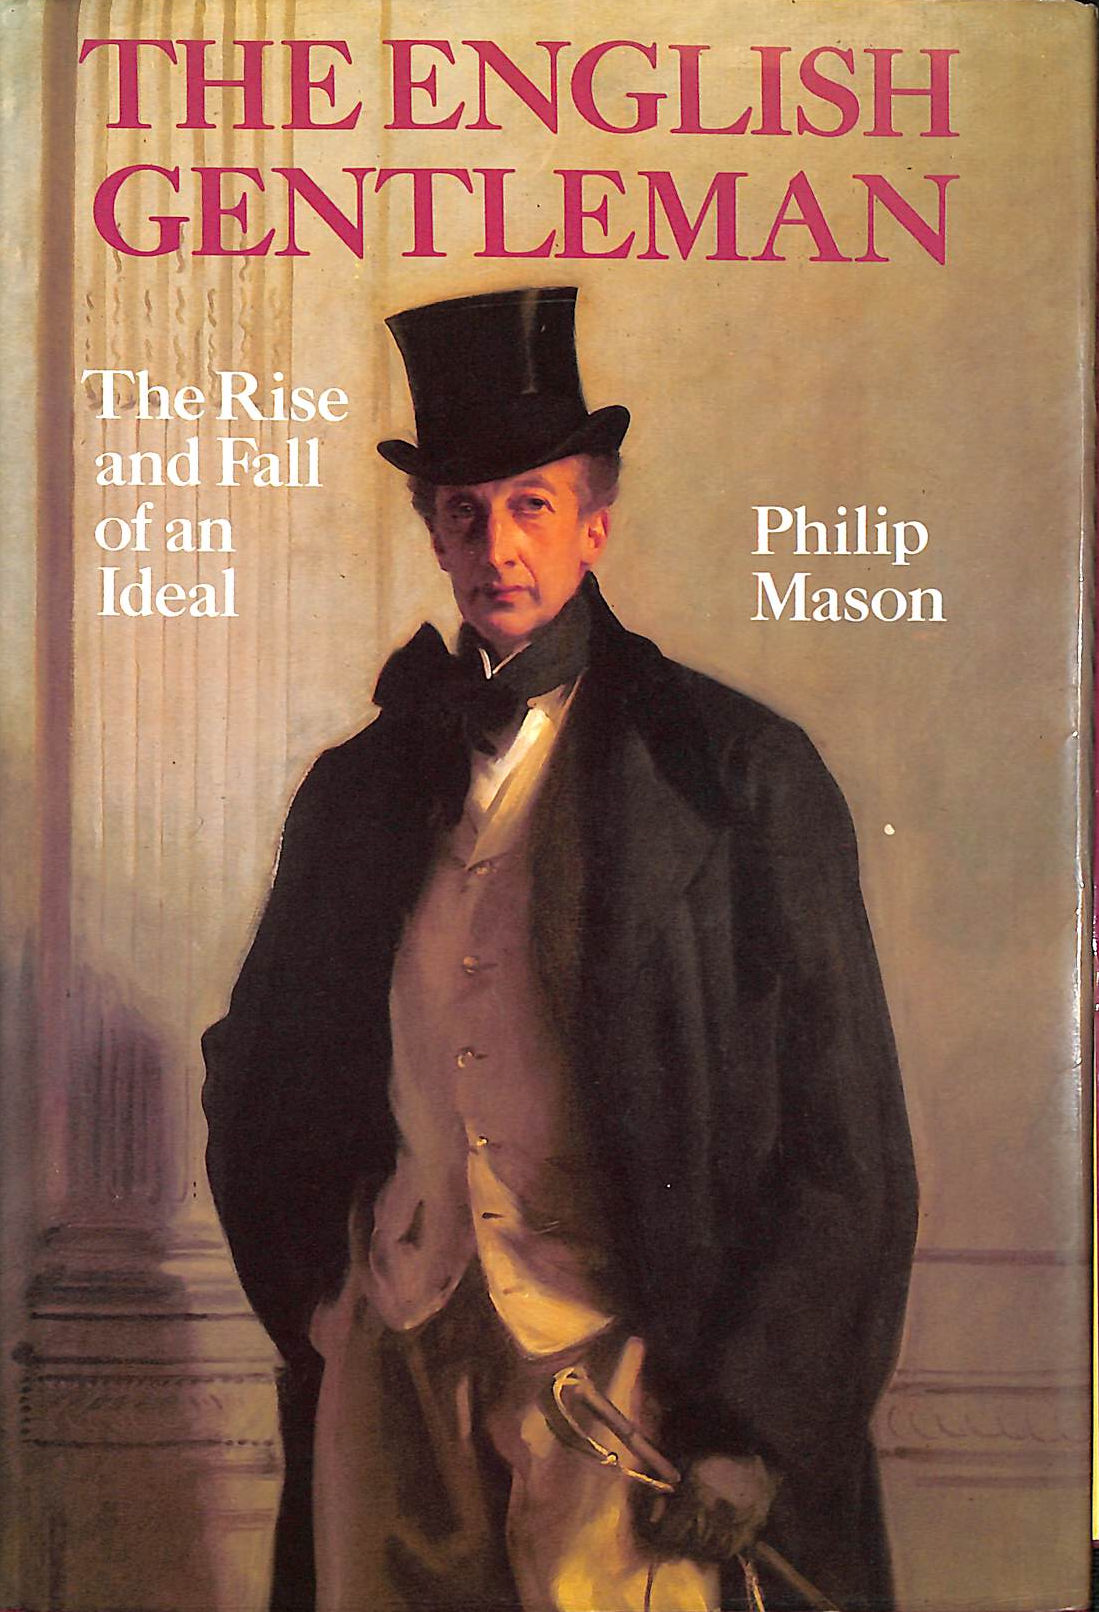 MASON, PHILIP - English Gentleman: The Rise and Fall of an Ideal